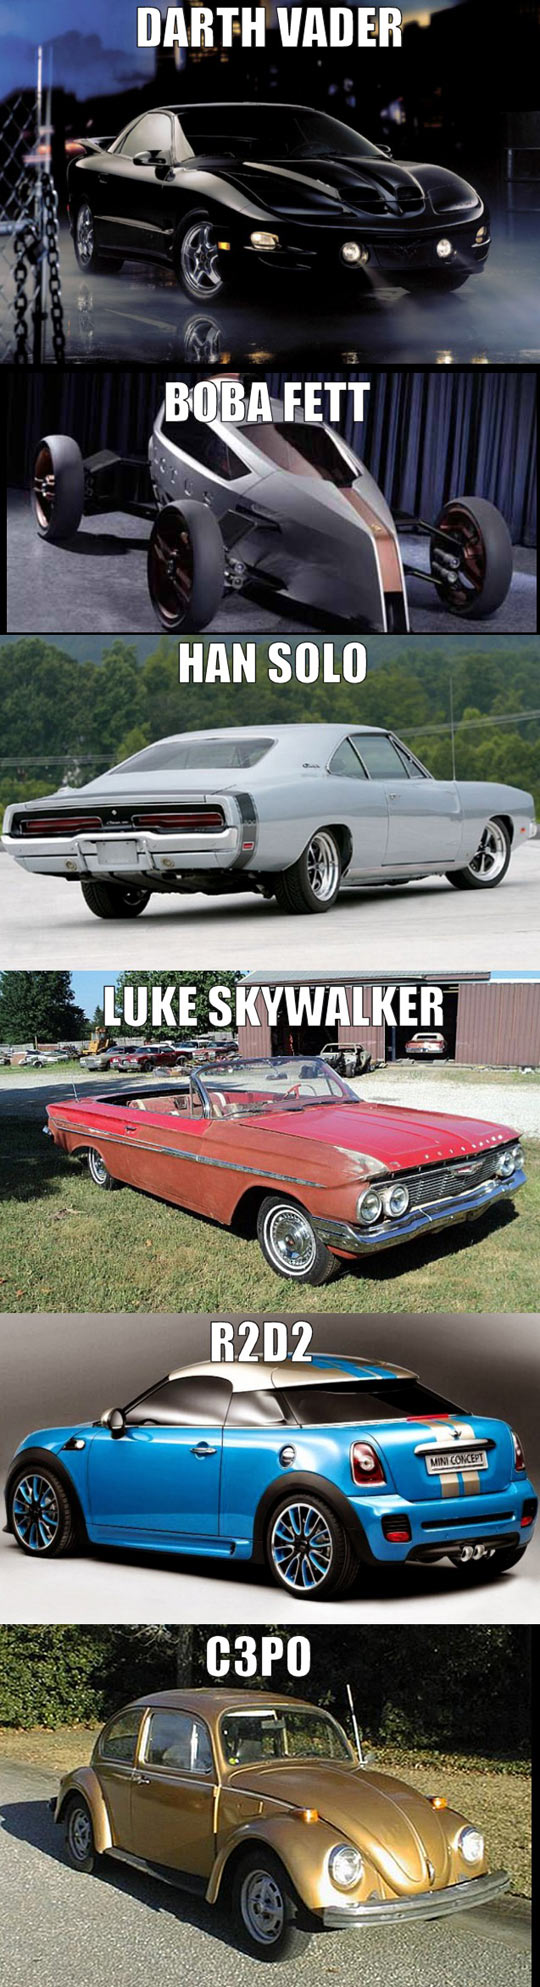 Star Wars Characters As Cars